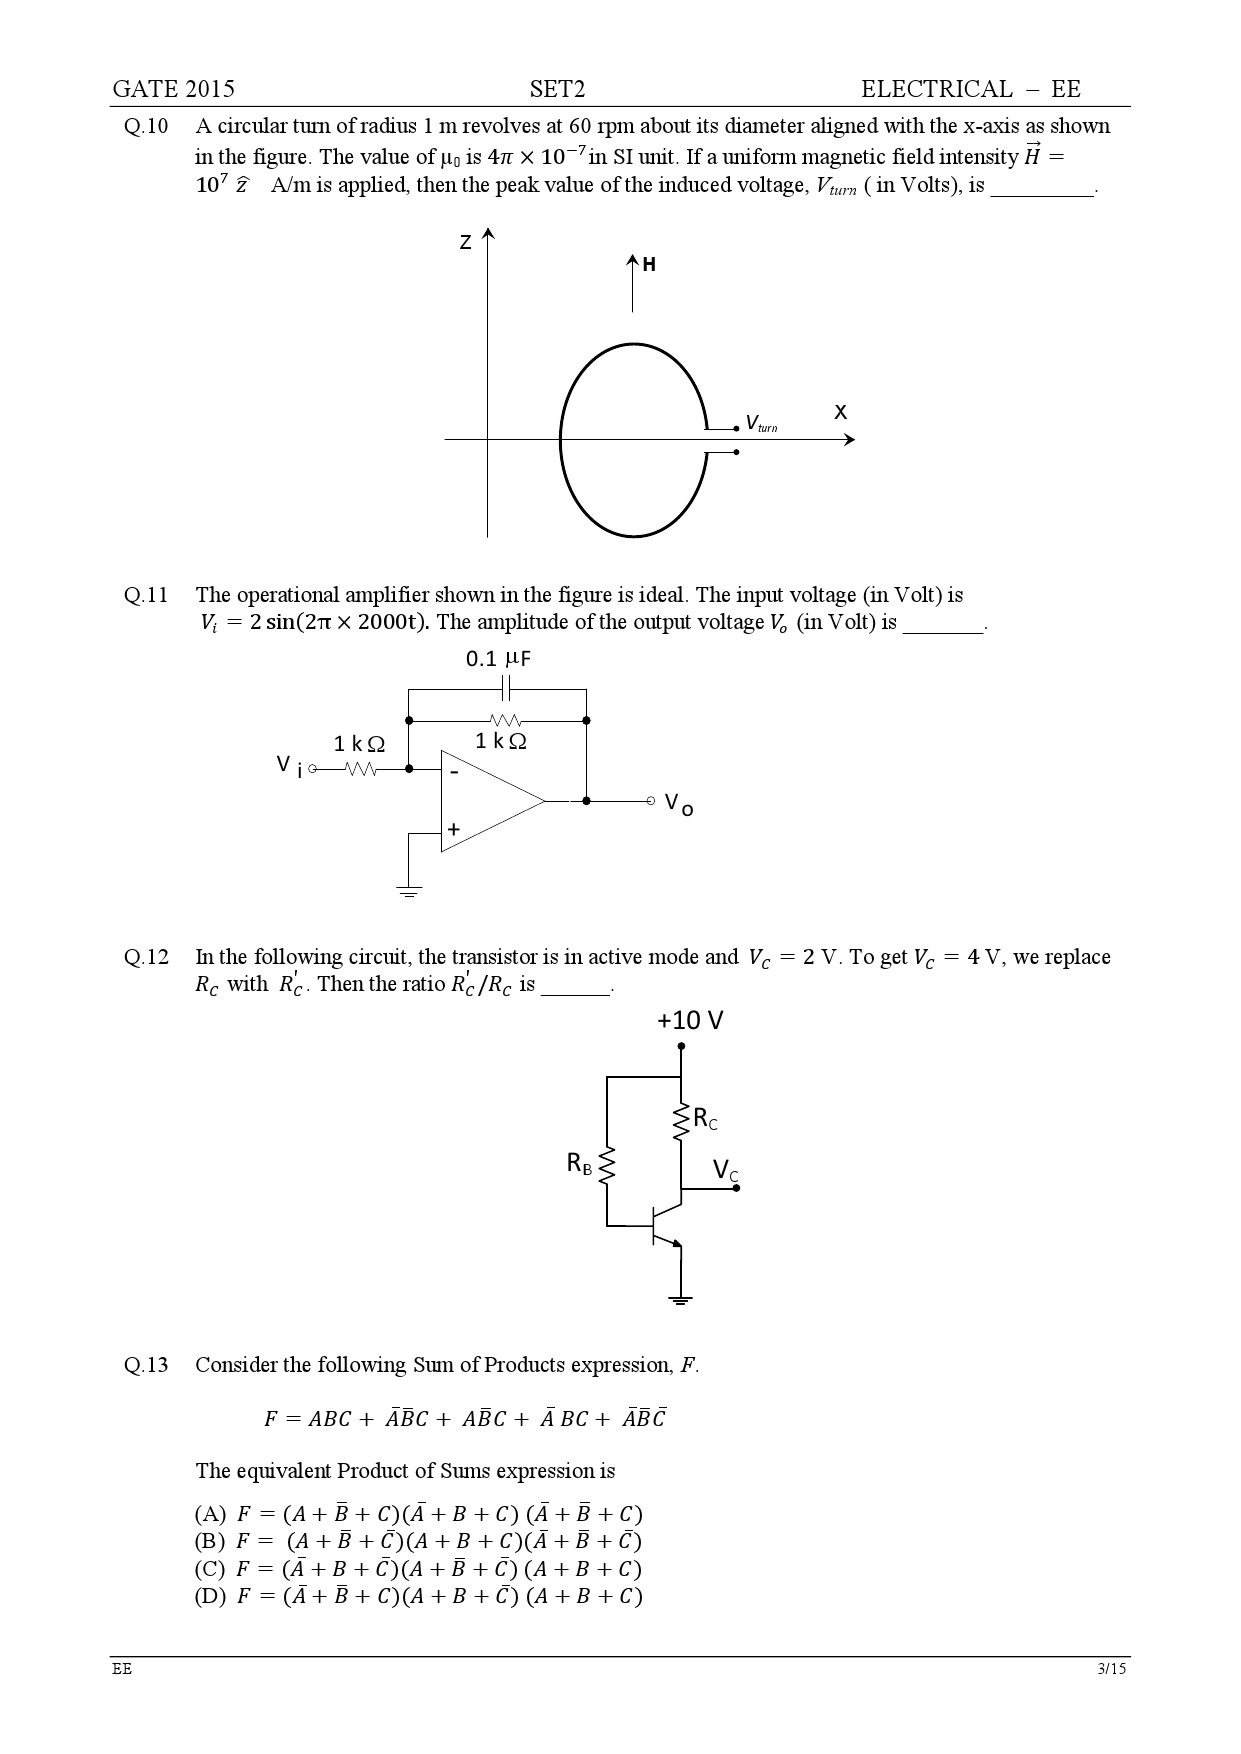 GATE Exam Question Paper 2015 Electrical Engineering Set 2 3